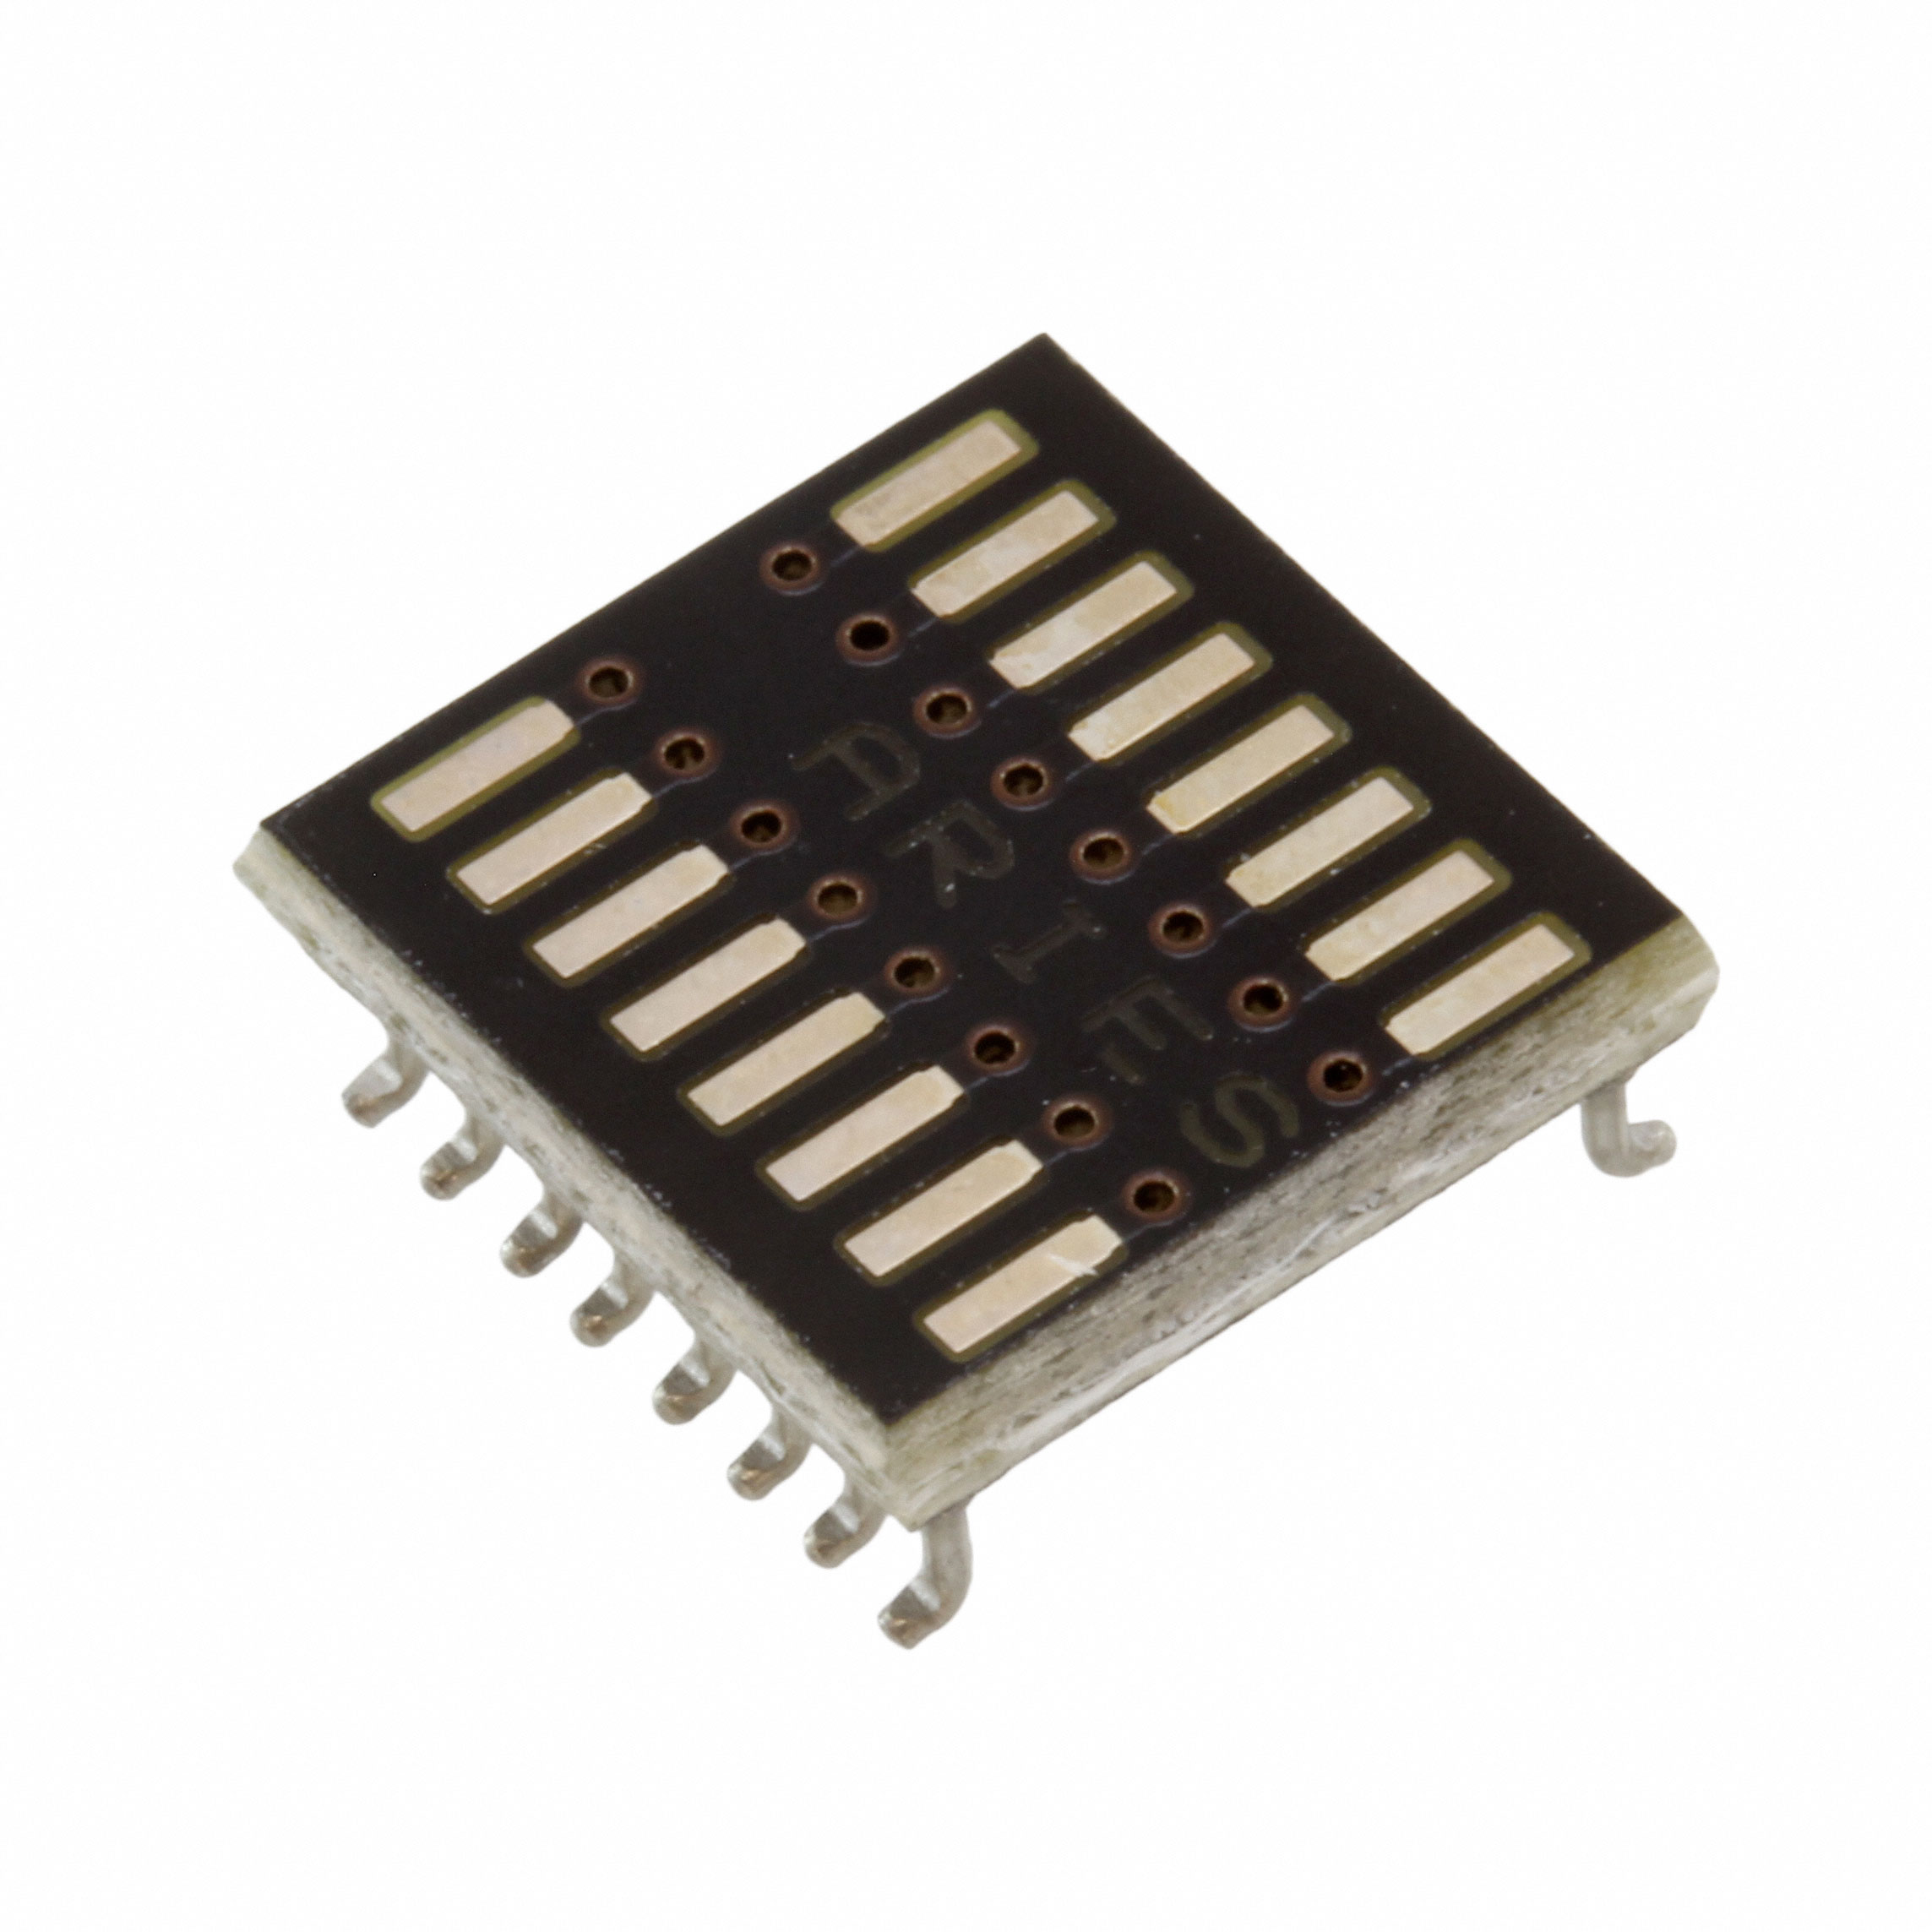 【16-666000-00】SOCKET ADAPTER SOIC TO 16SOWIC